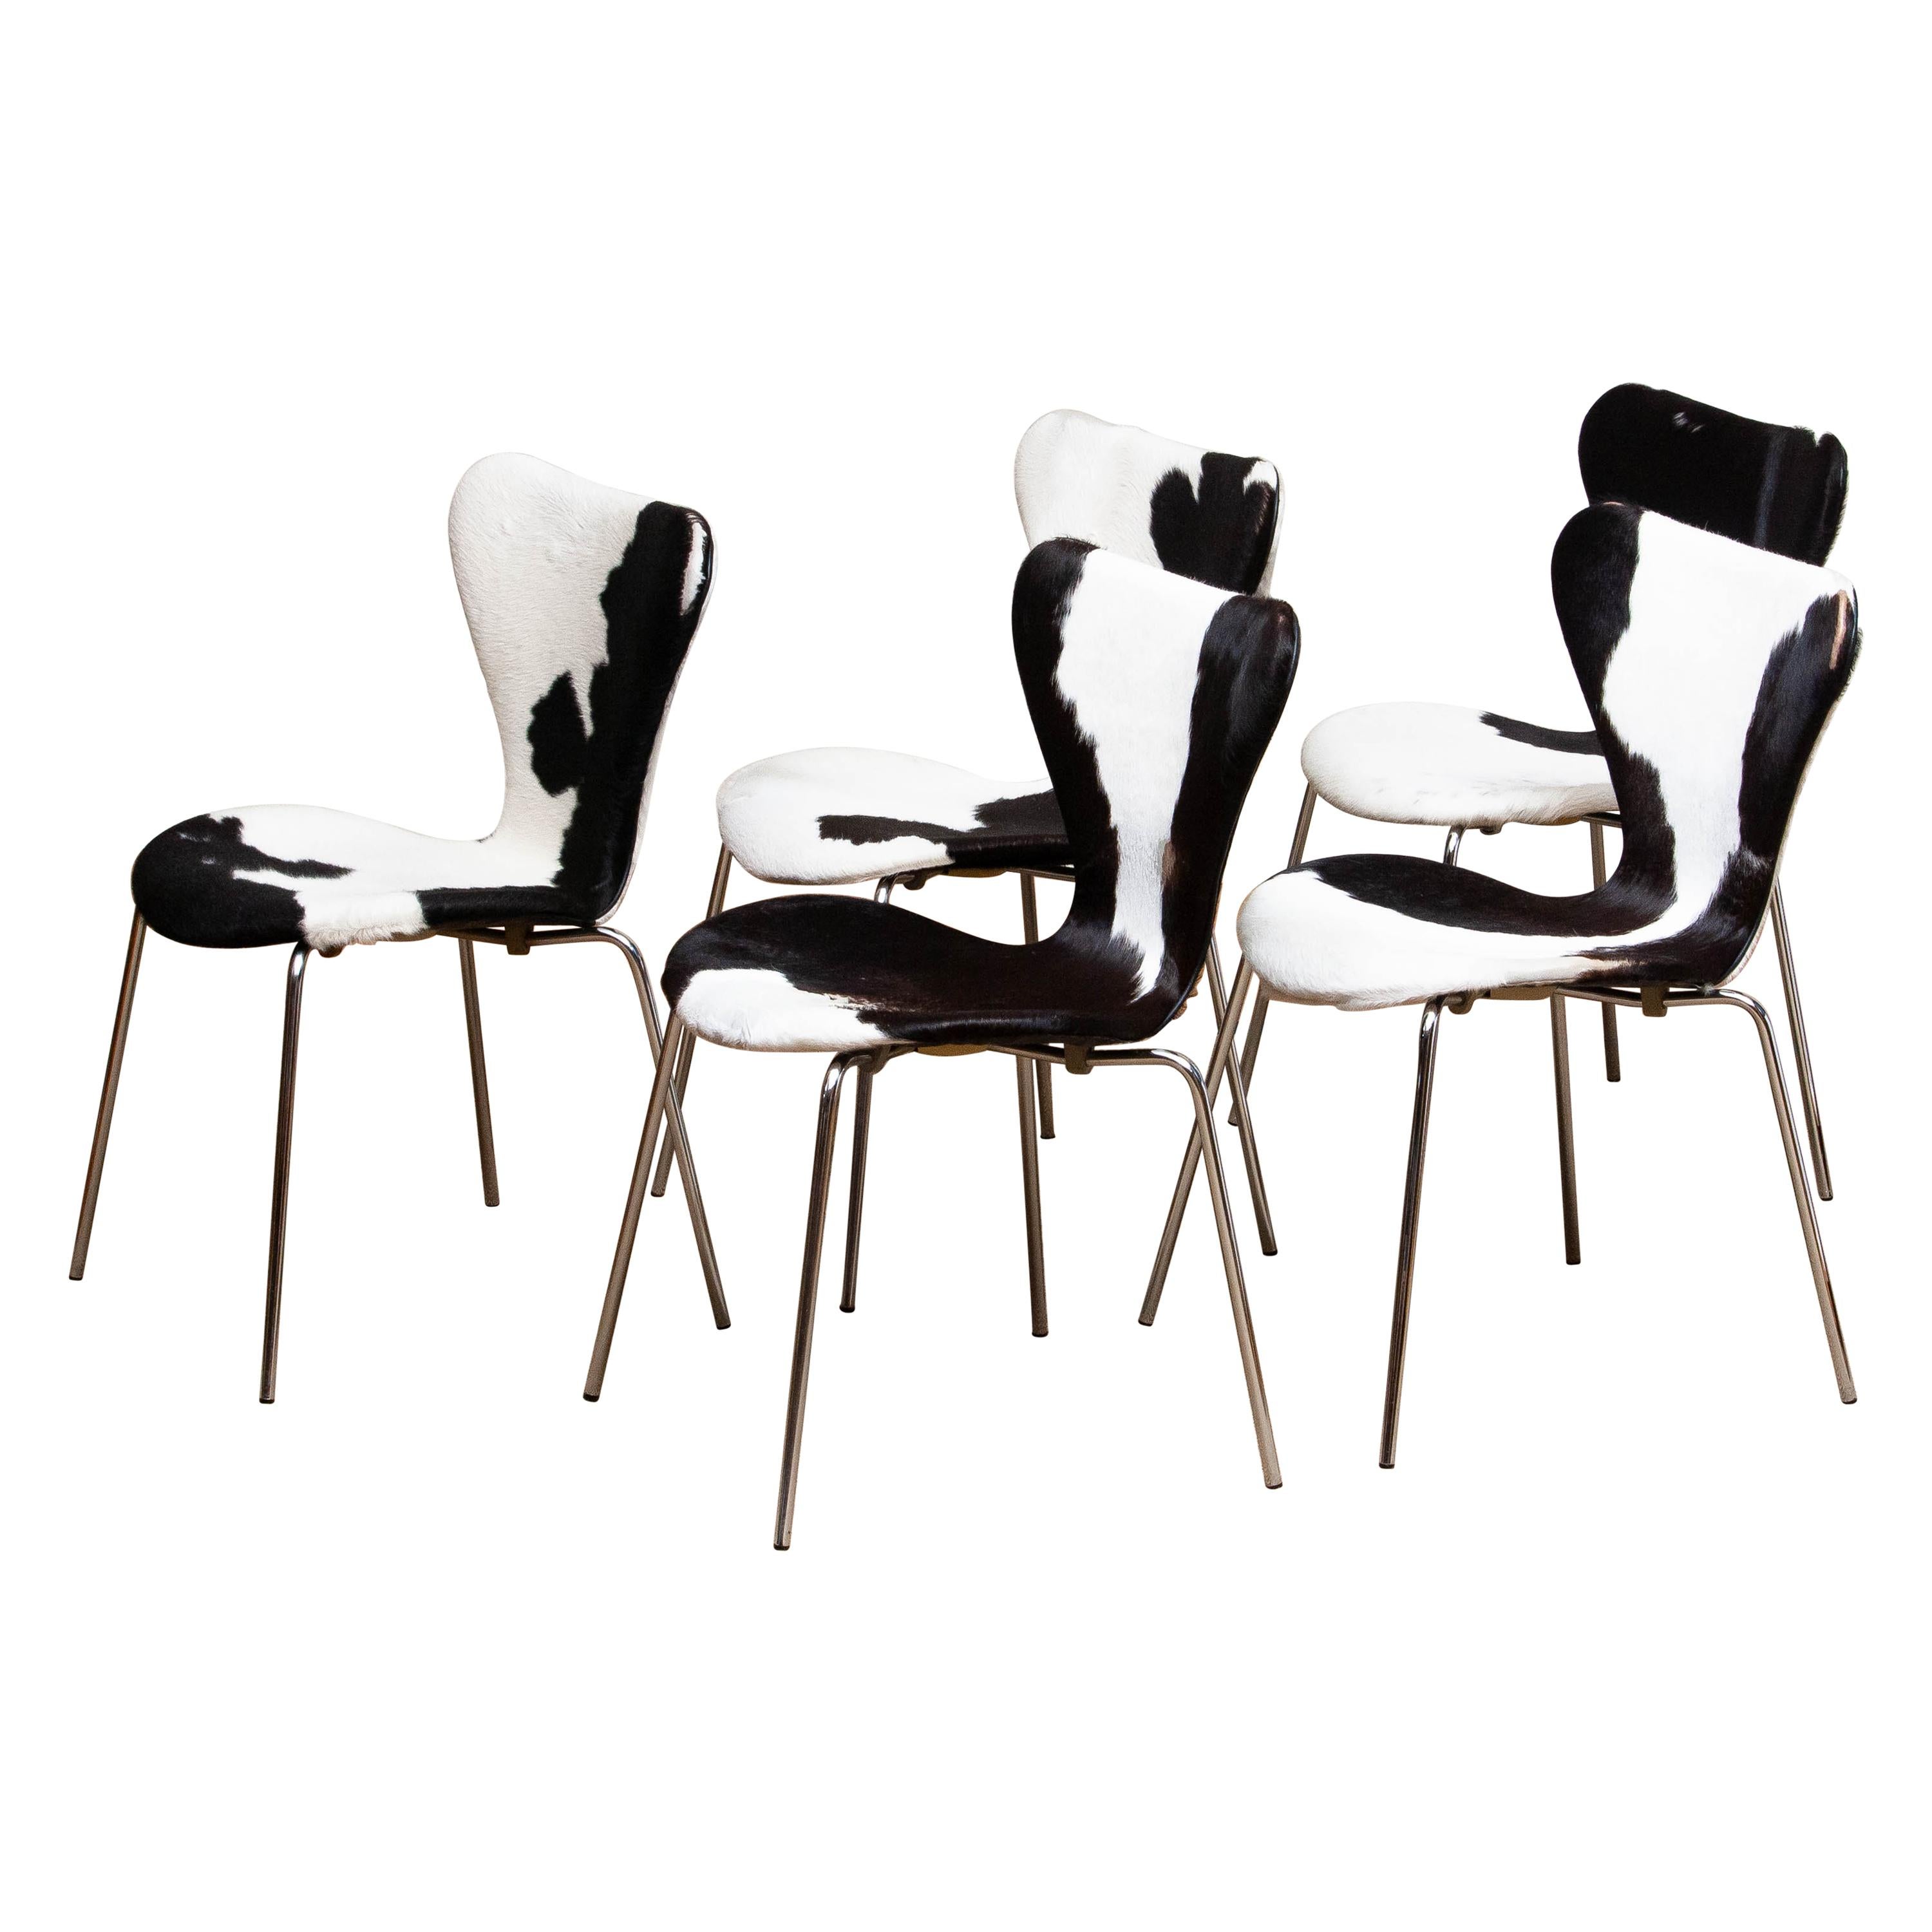 1970s, 5 Cowhide Fur Dining Chairs by Arne Jacobsen & Fritz Hansen Model 3107